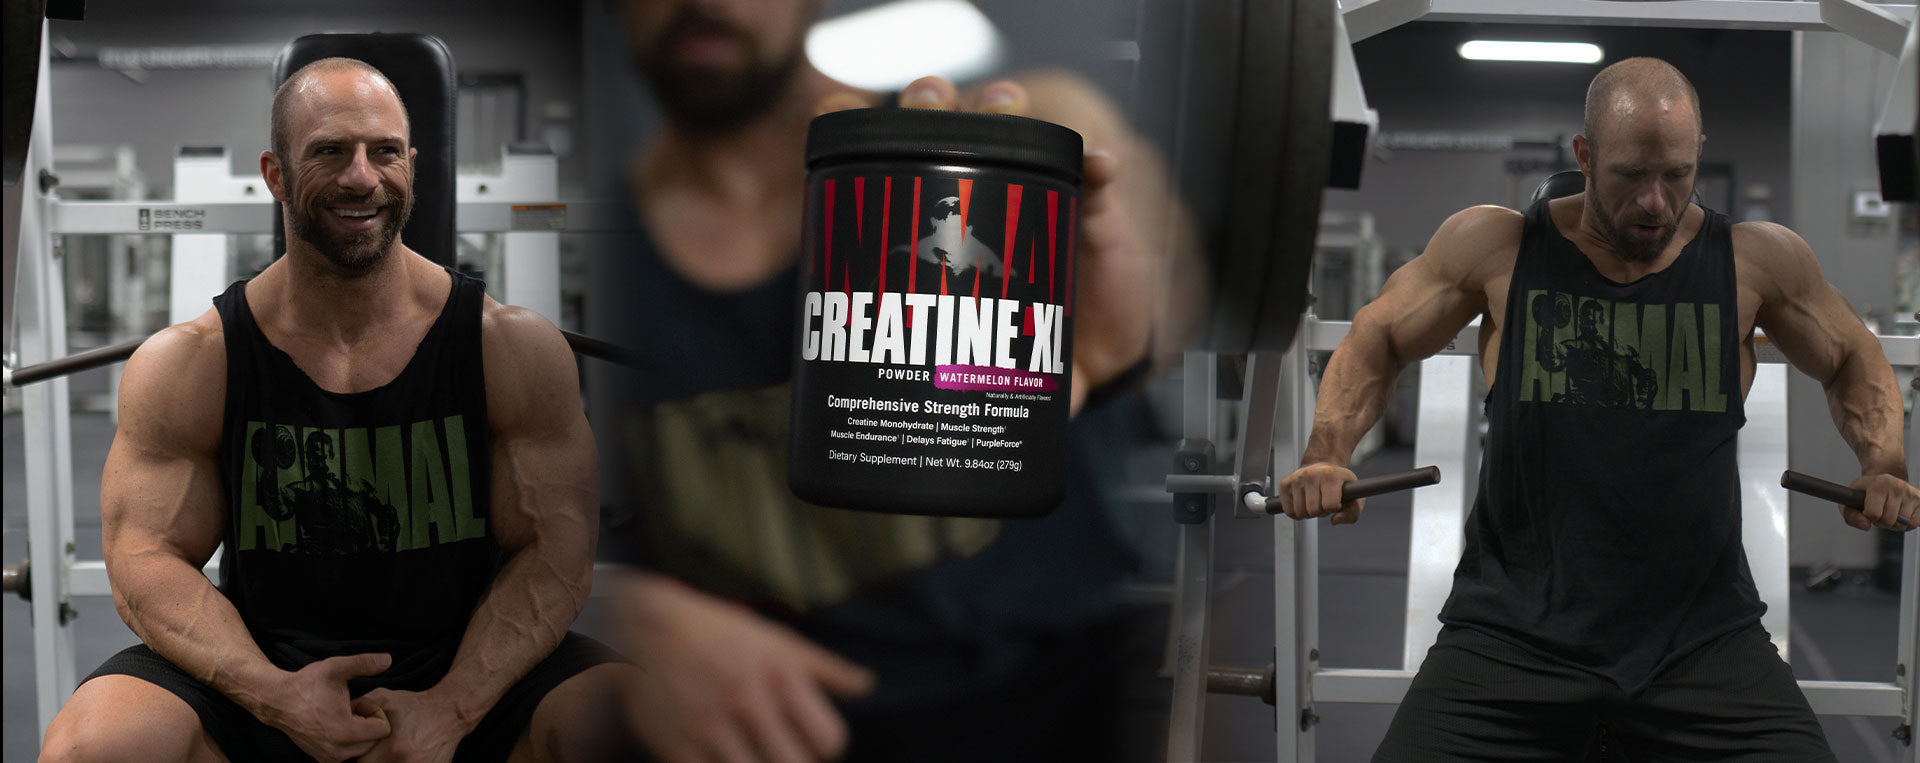 Creatine: Muscle Pumps, Brain Gains, and Pooping Your Pants